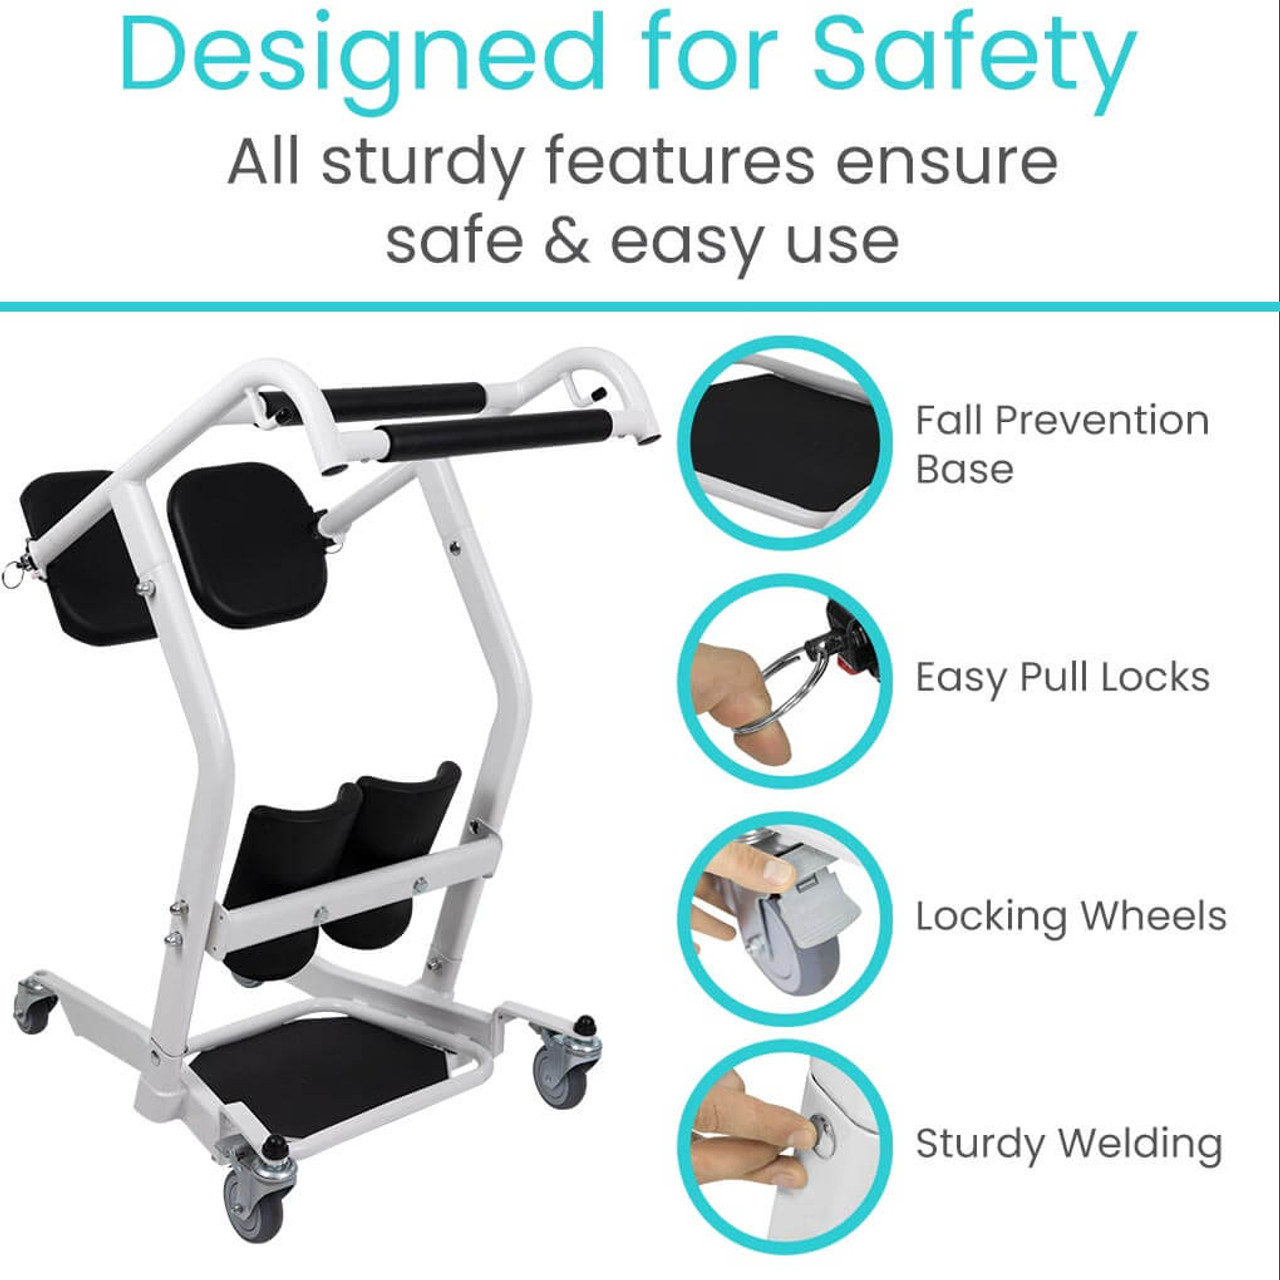 Transport Stand Assist by Vive - Safe and Easy Mobility Assistance-Chicken Pieces